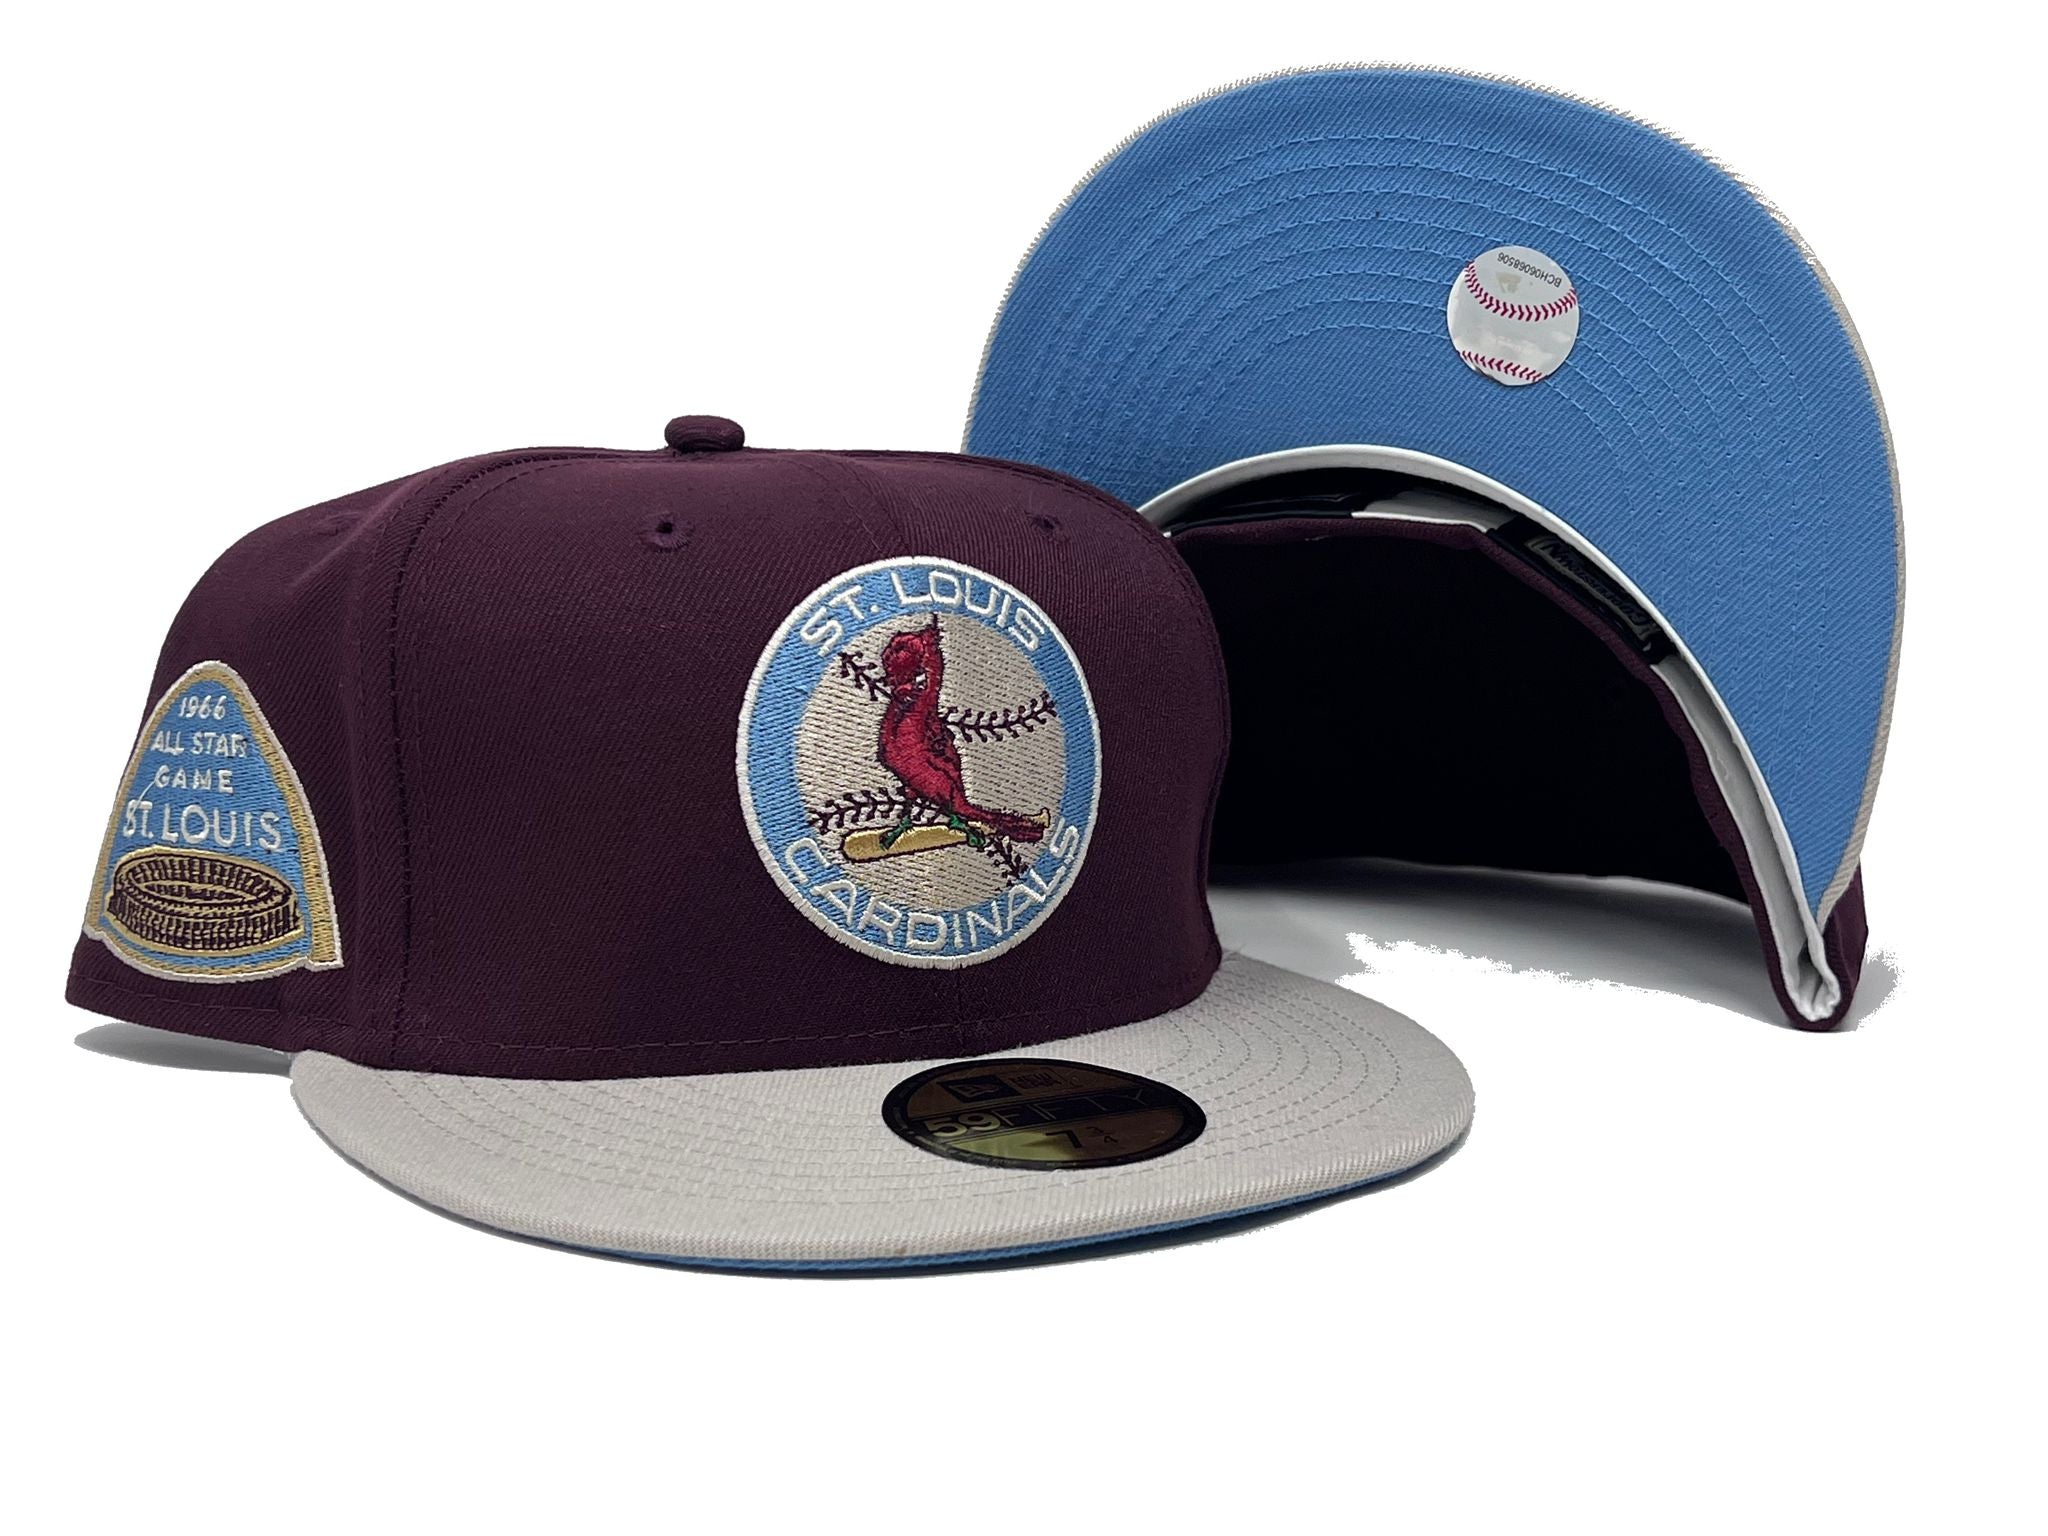 St. Louis Cardinals New Era 1966 MLB All-Star Game Grape Lolli 59FIFTY  Fitted Hat - White/Purple